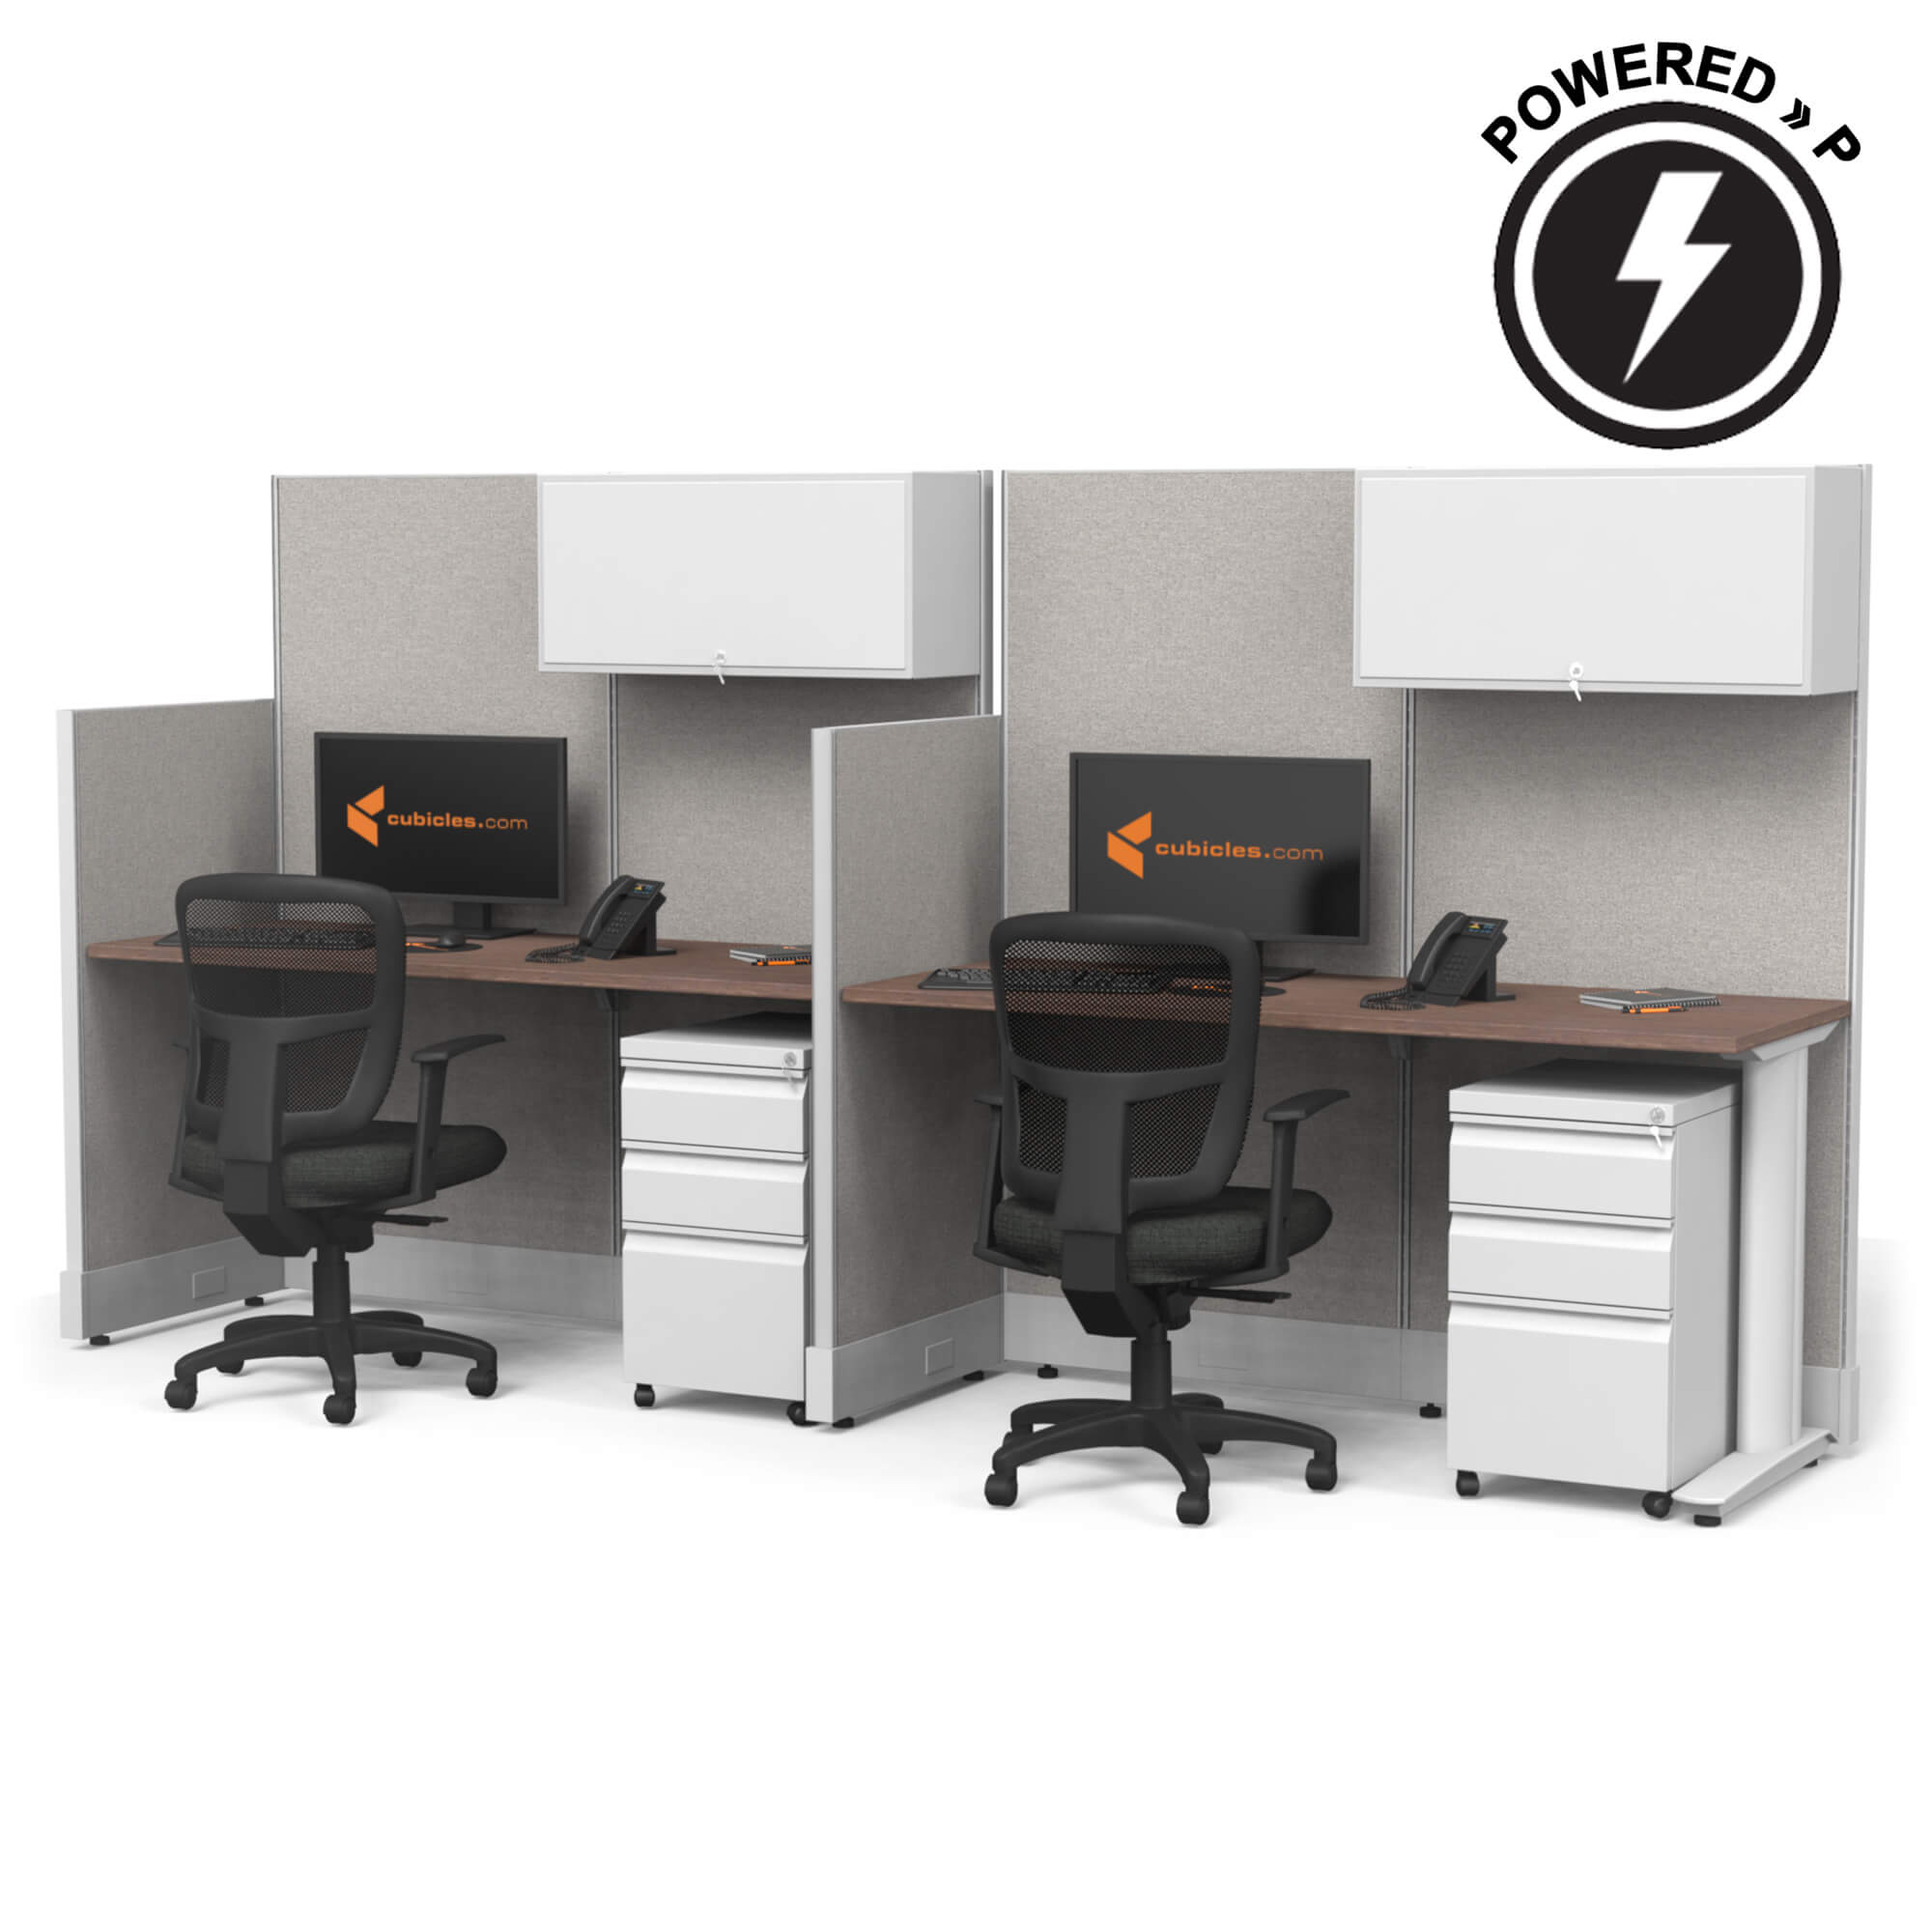 cubicle-desk-straight-workstation-2pack-inline-powered-with-storage-sign-1.jpg